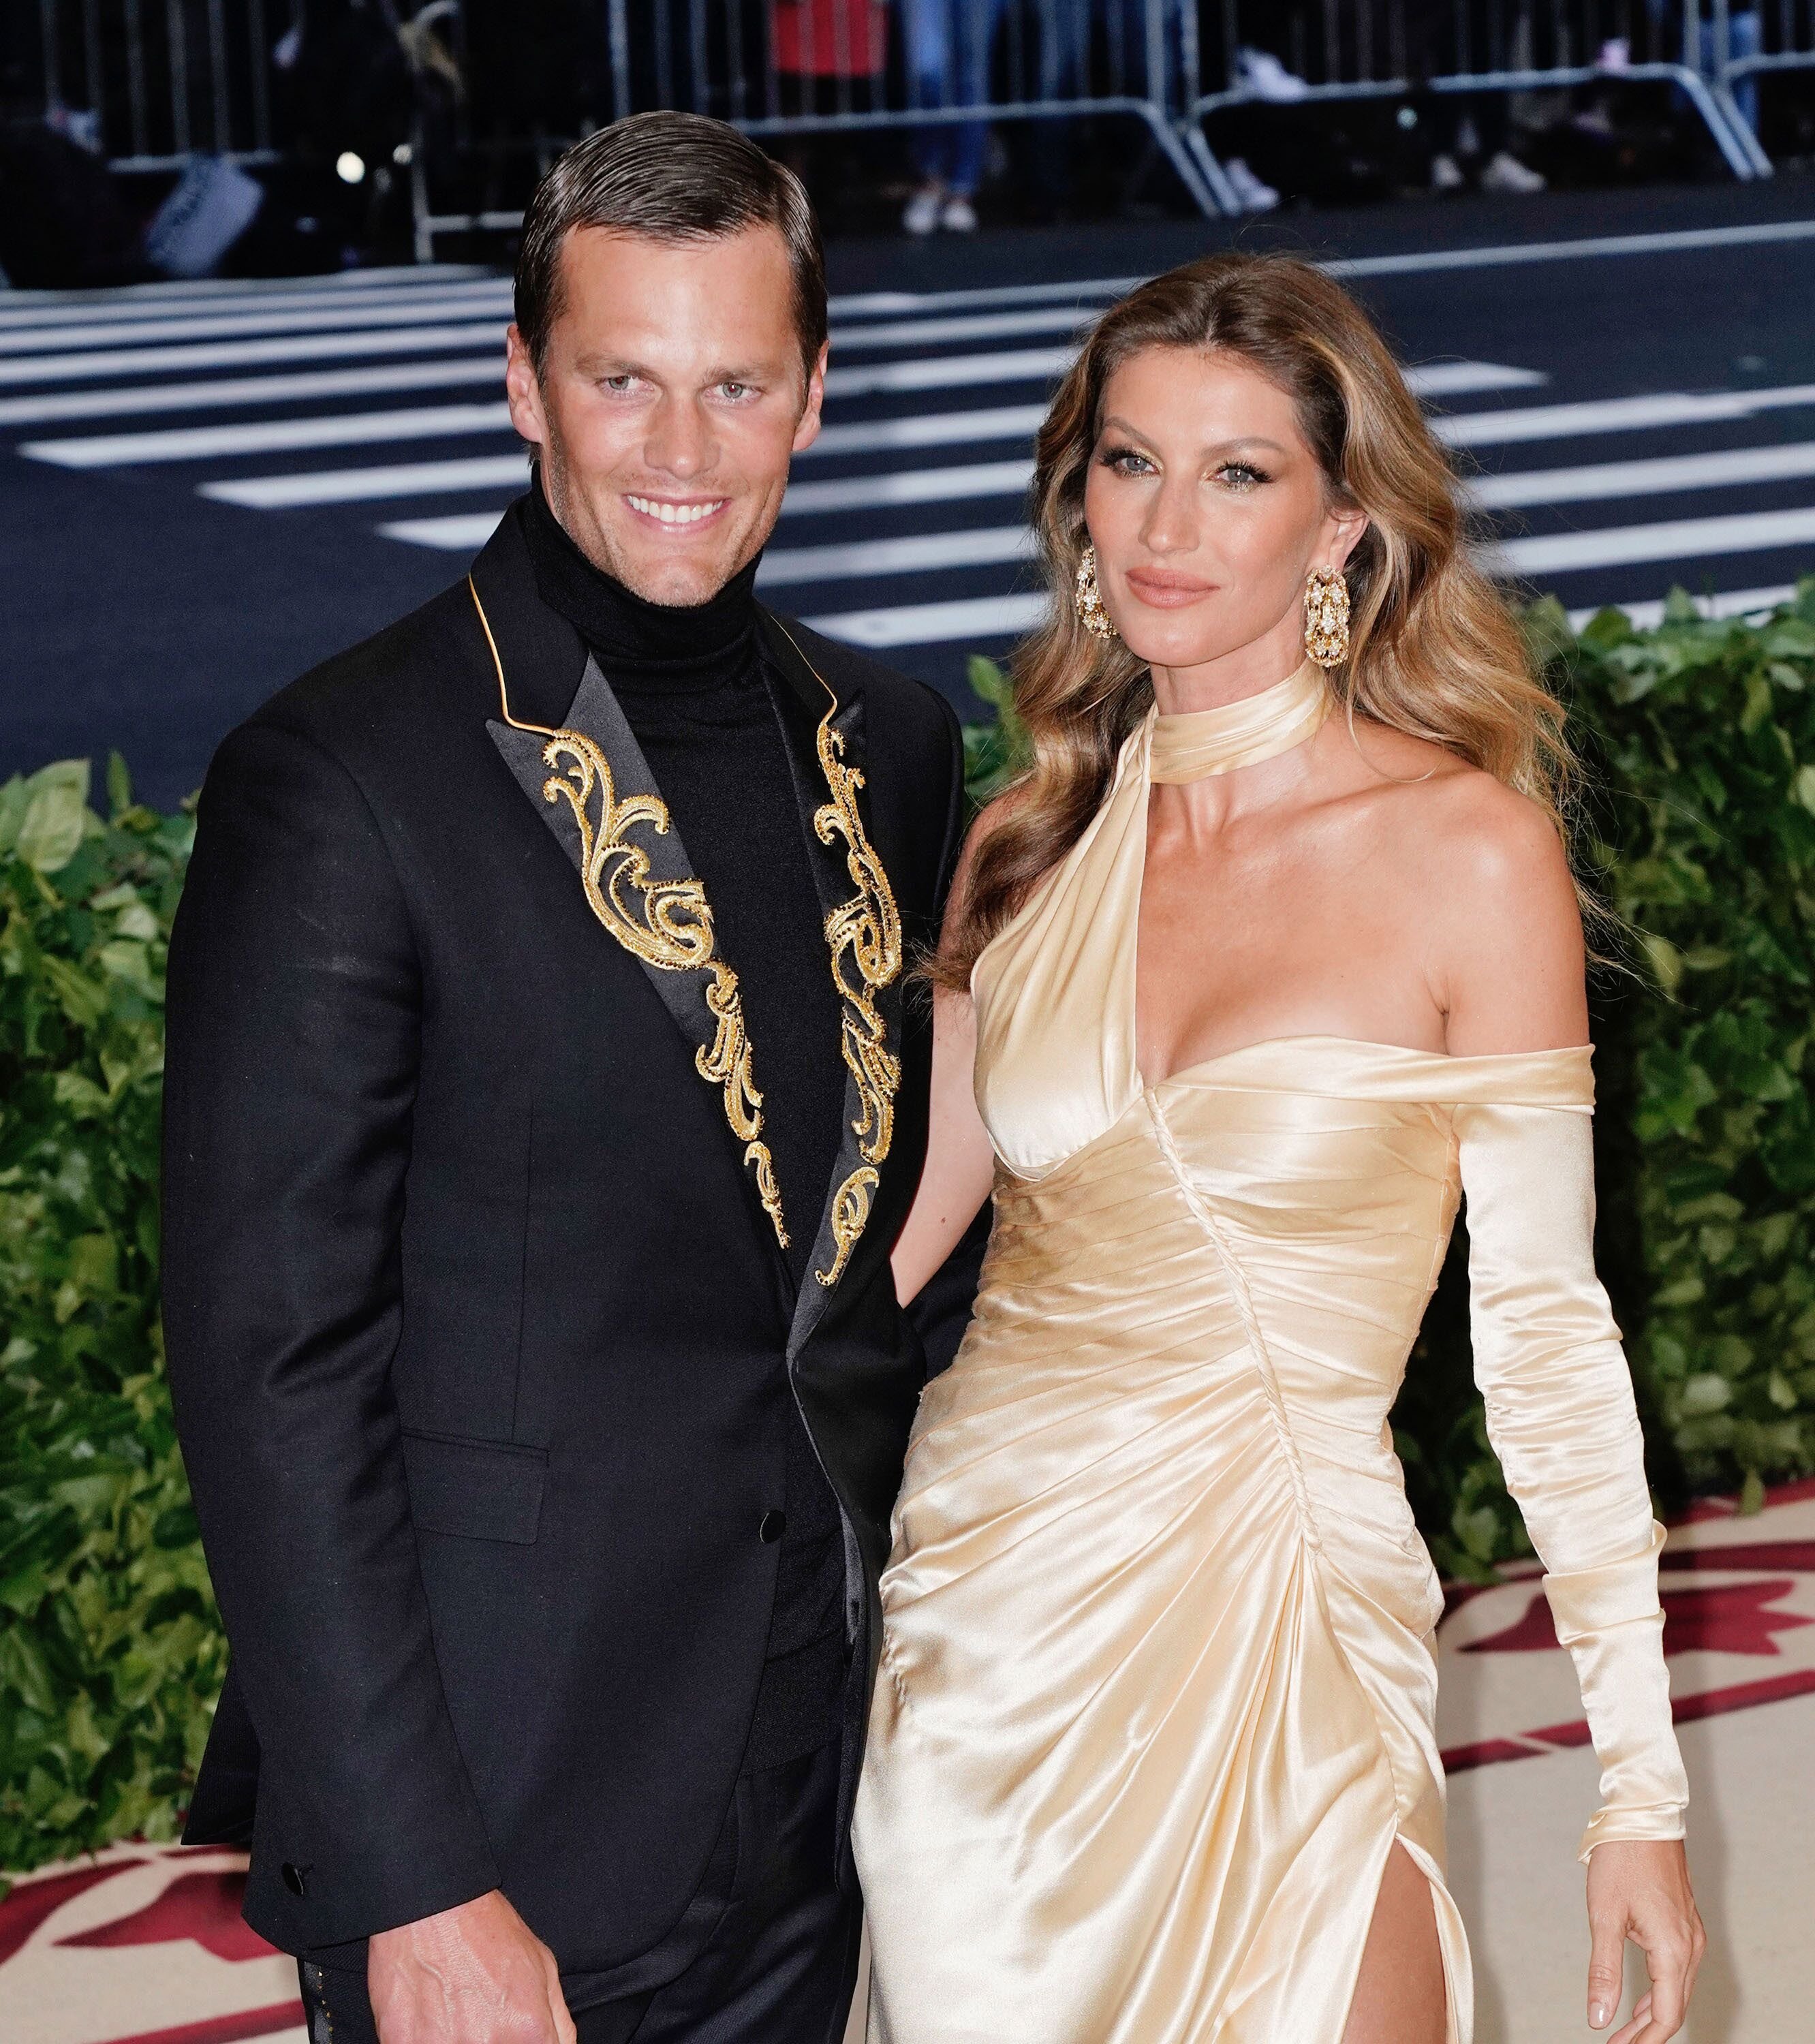 Gisele Bundchen and Tom Brady 2018 MET Gala in New York | Source: Getty Images